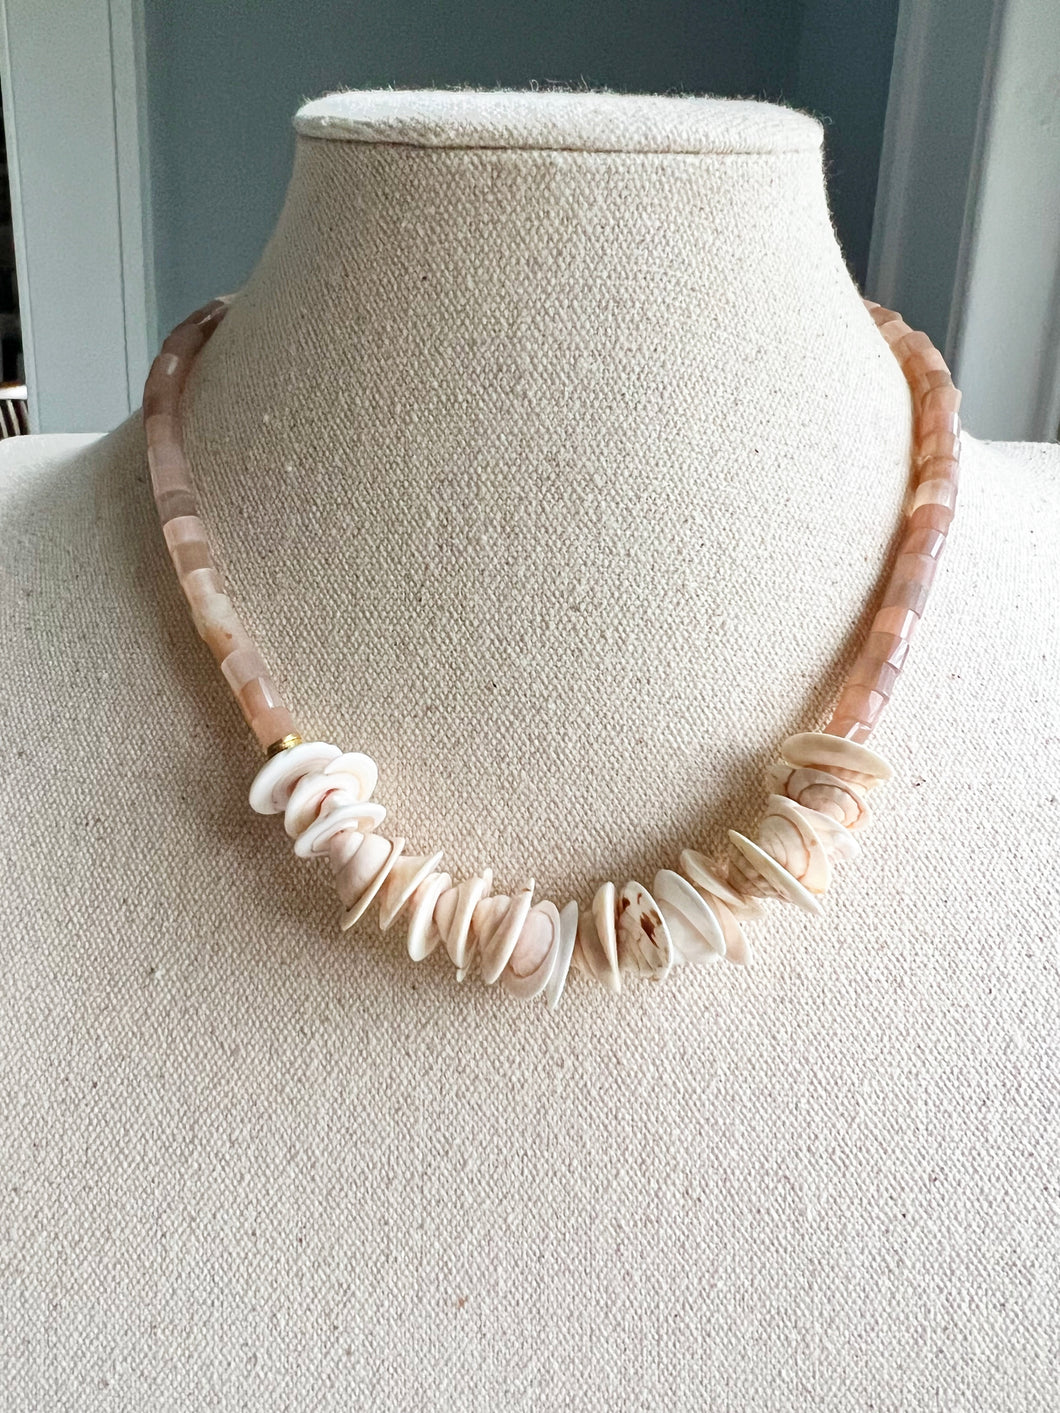 Puka shell and peach moonstone necklace